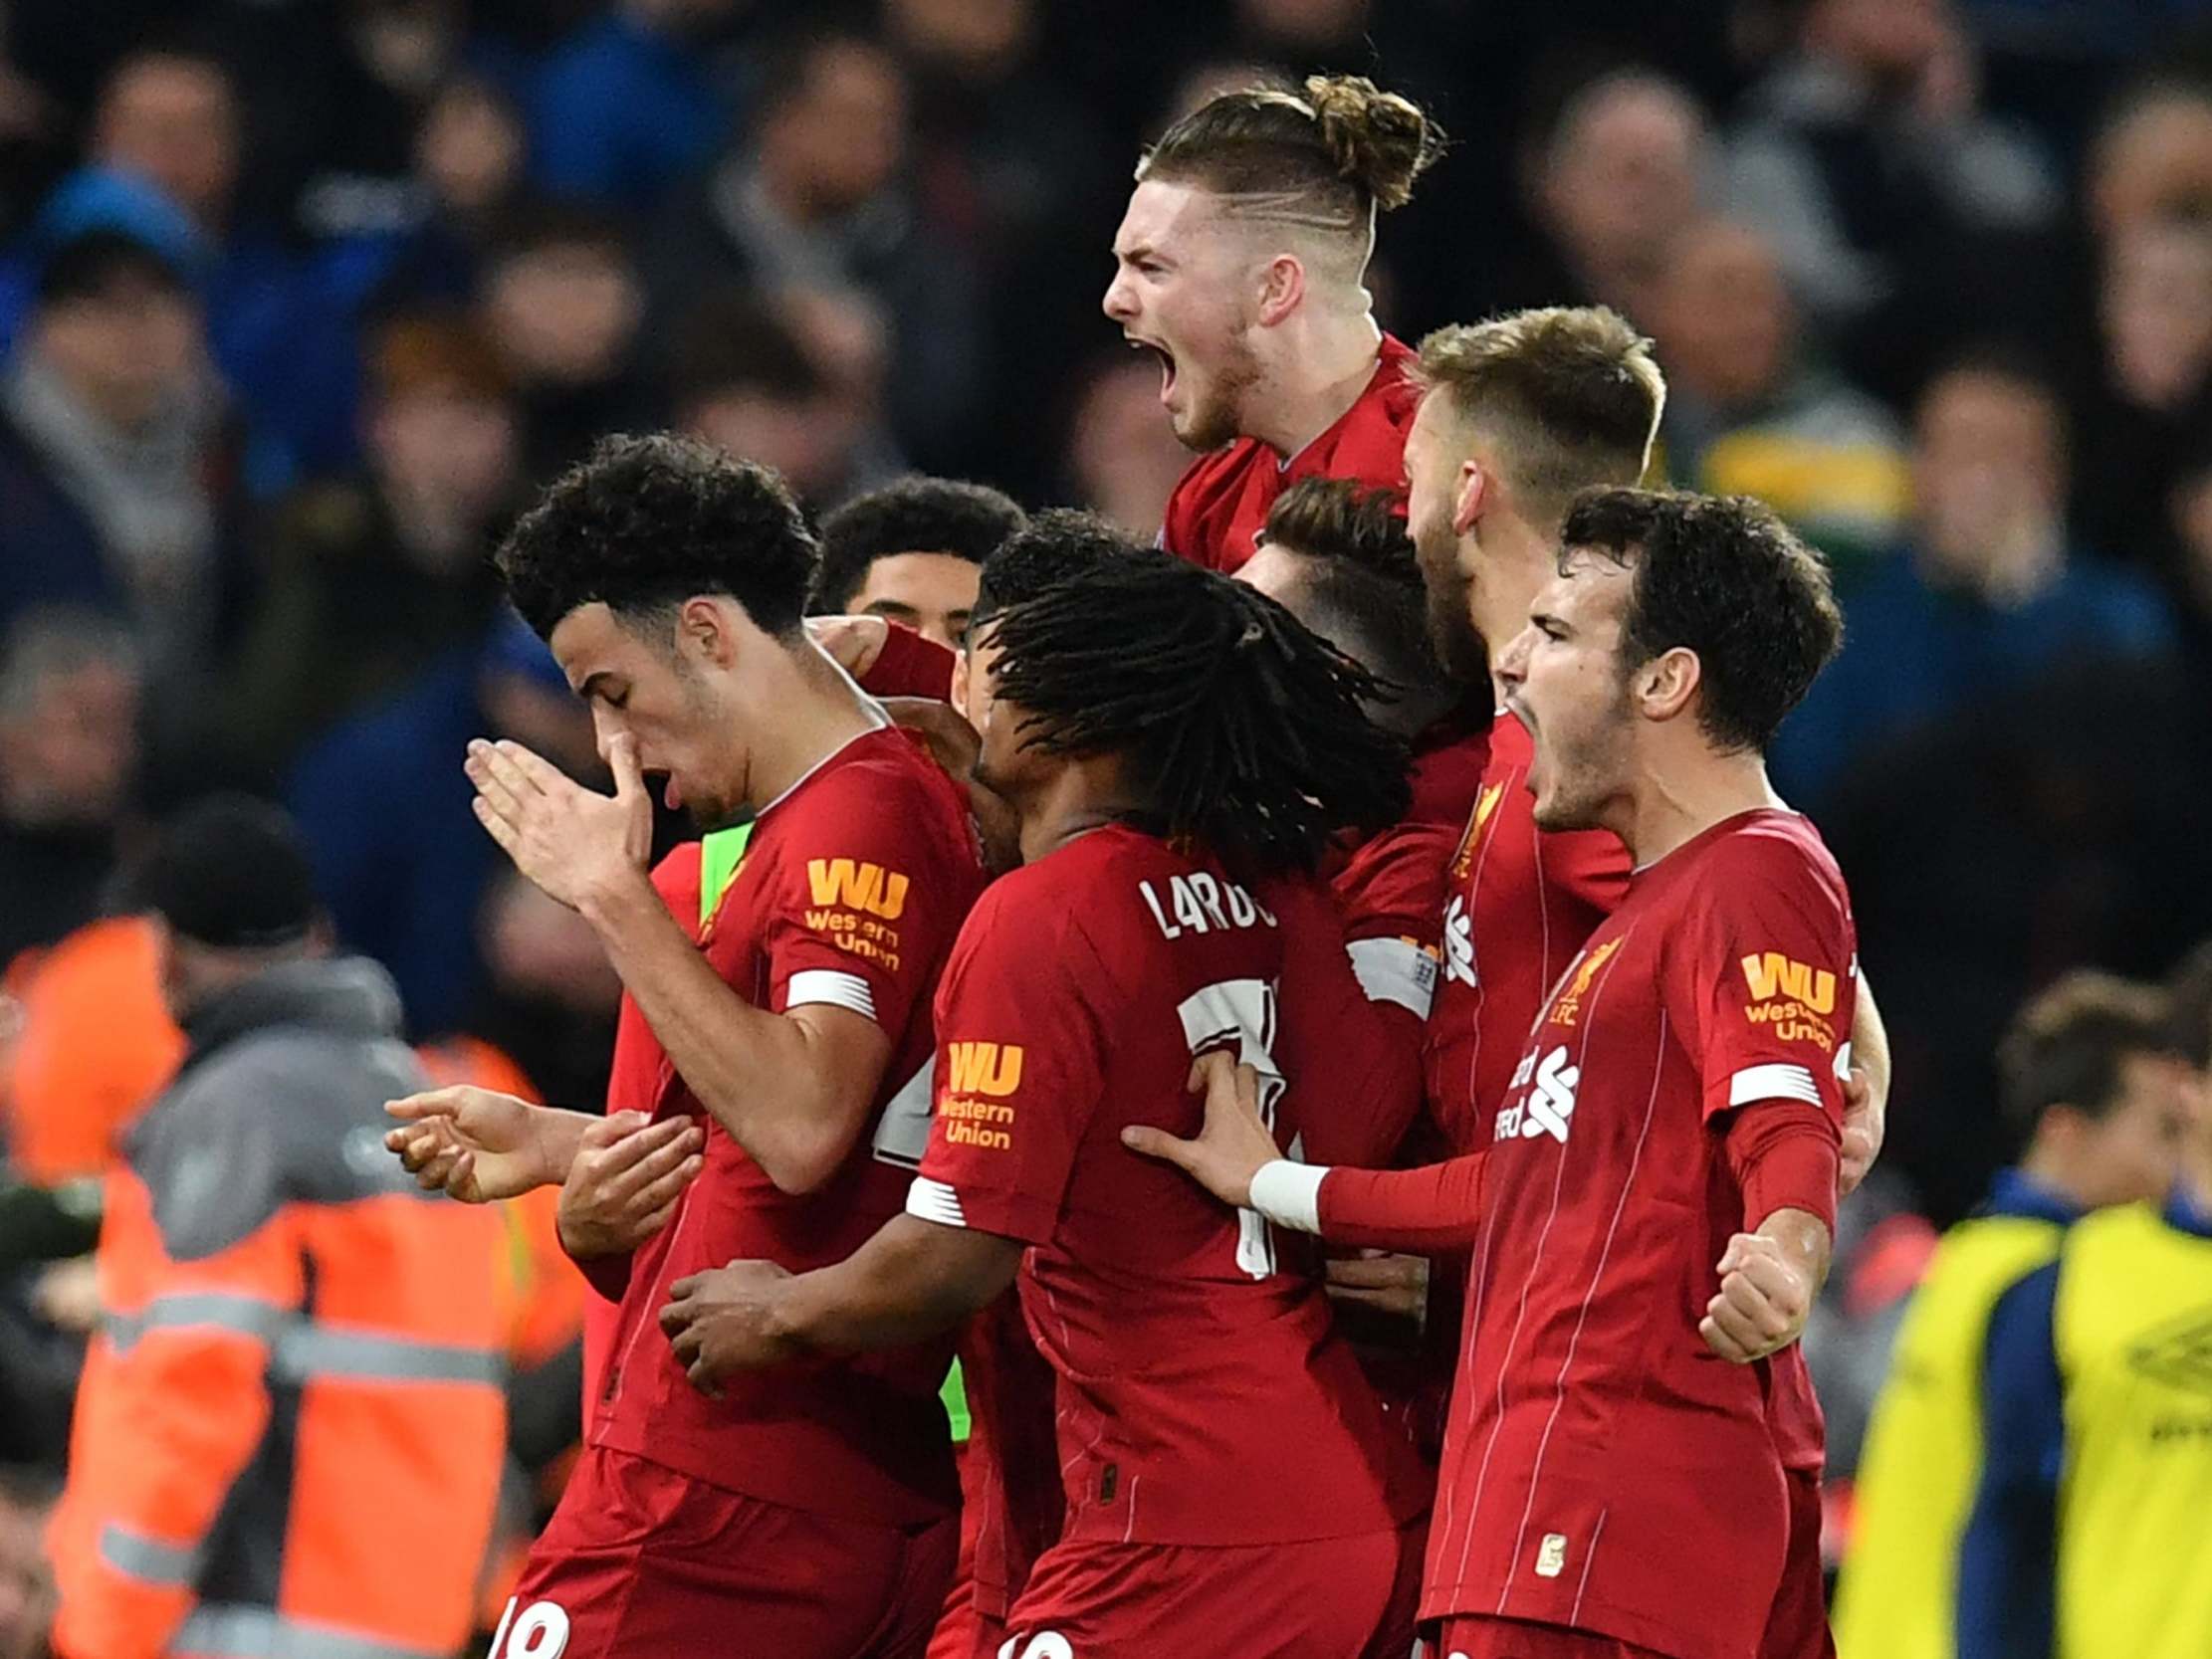 Liverpool vs Everton result: Player ratings as Curtis Jones scores spectacular FA Cup winner